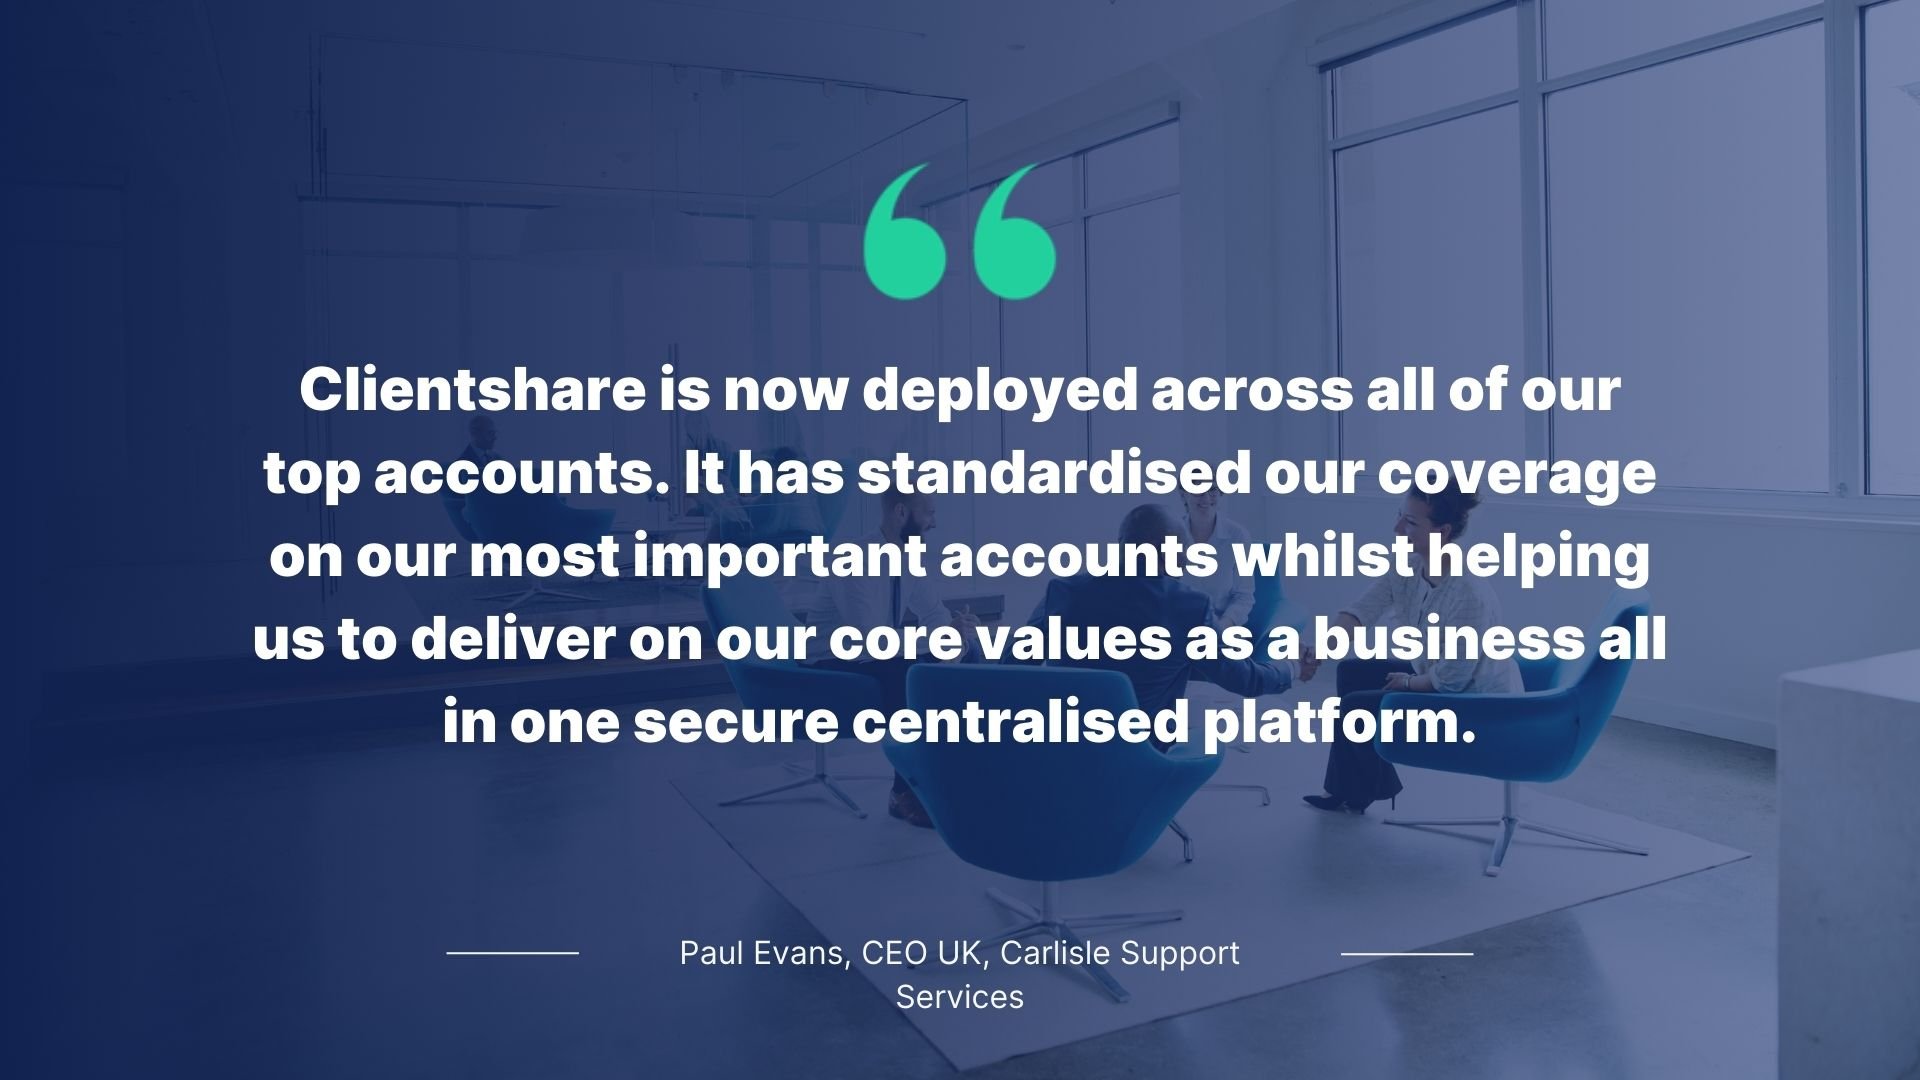 Quote by Paul Evans, CEO, Carlisle Support Services: Clientshare is now deployed across all of our top accounts. It has standardised our coverage on our most important core values as a business all in one secure platform.